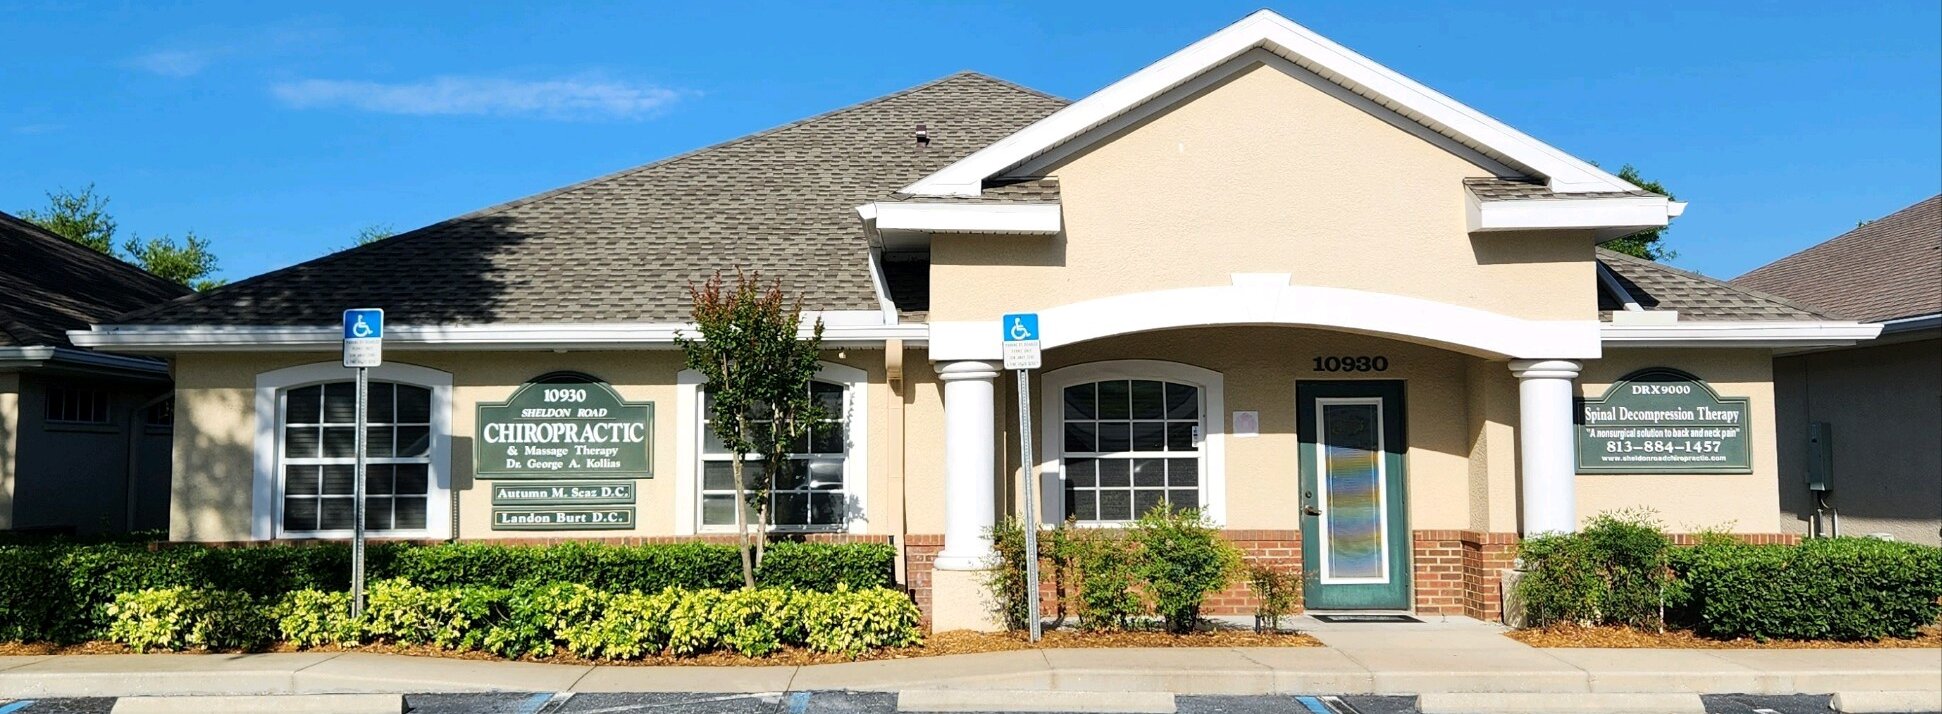 Sheldon Road Chiropractic & Massage Therapy in Westchase, FL